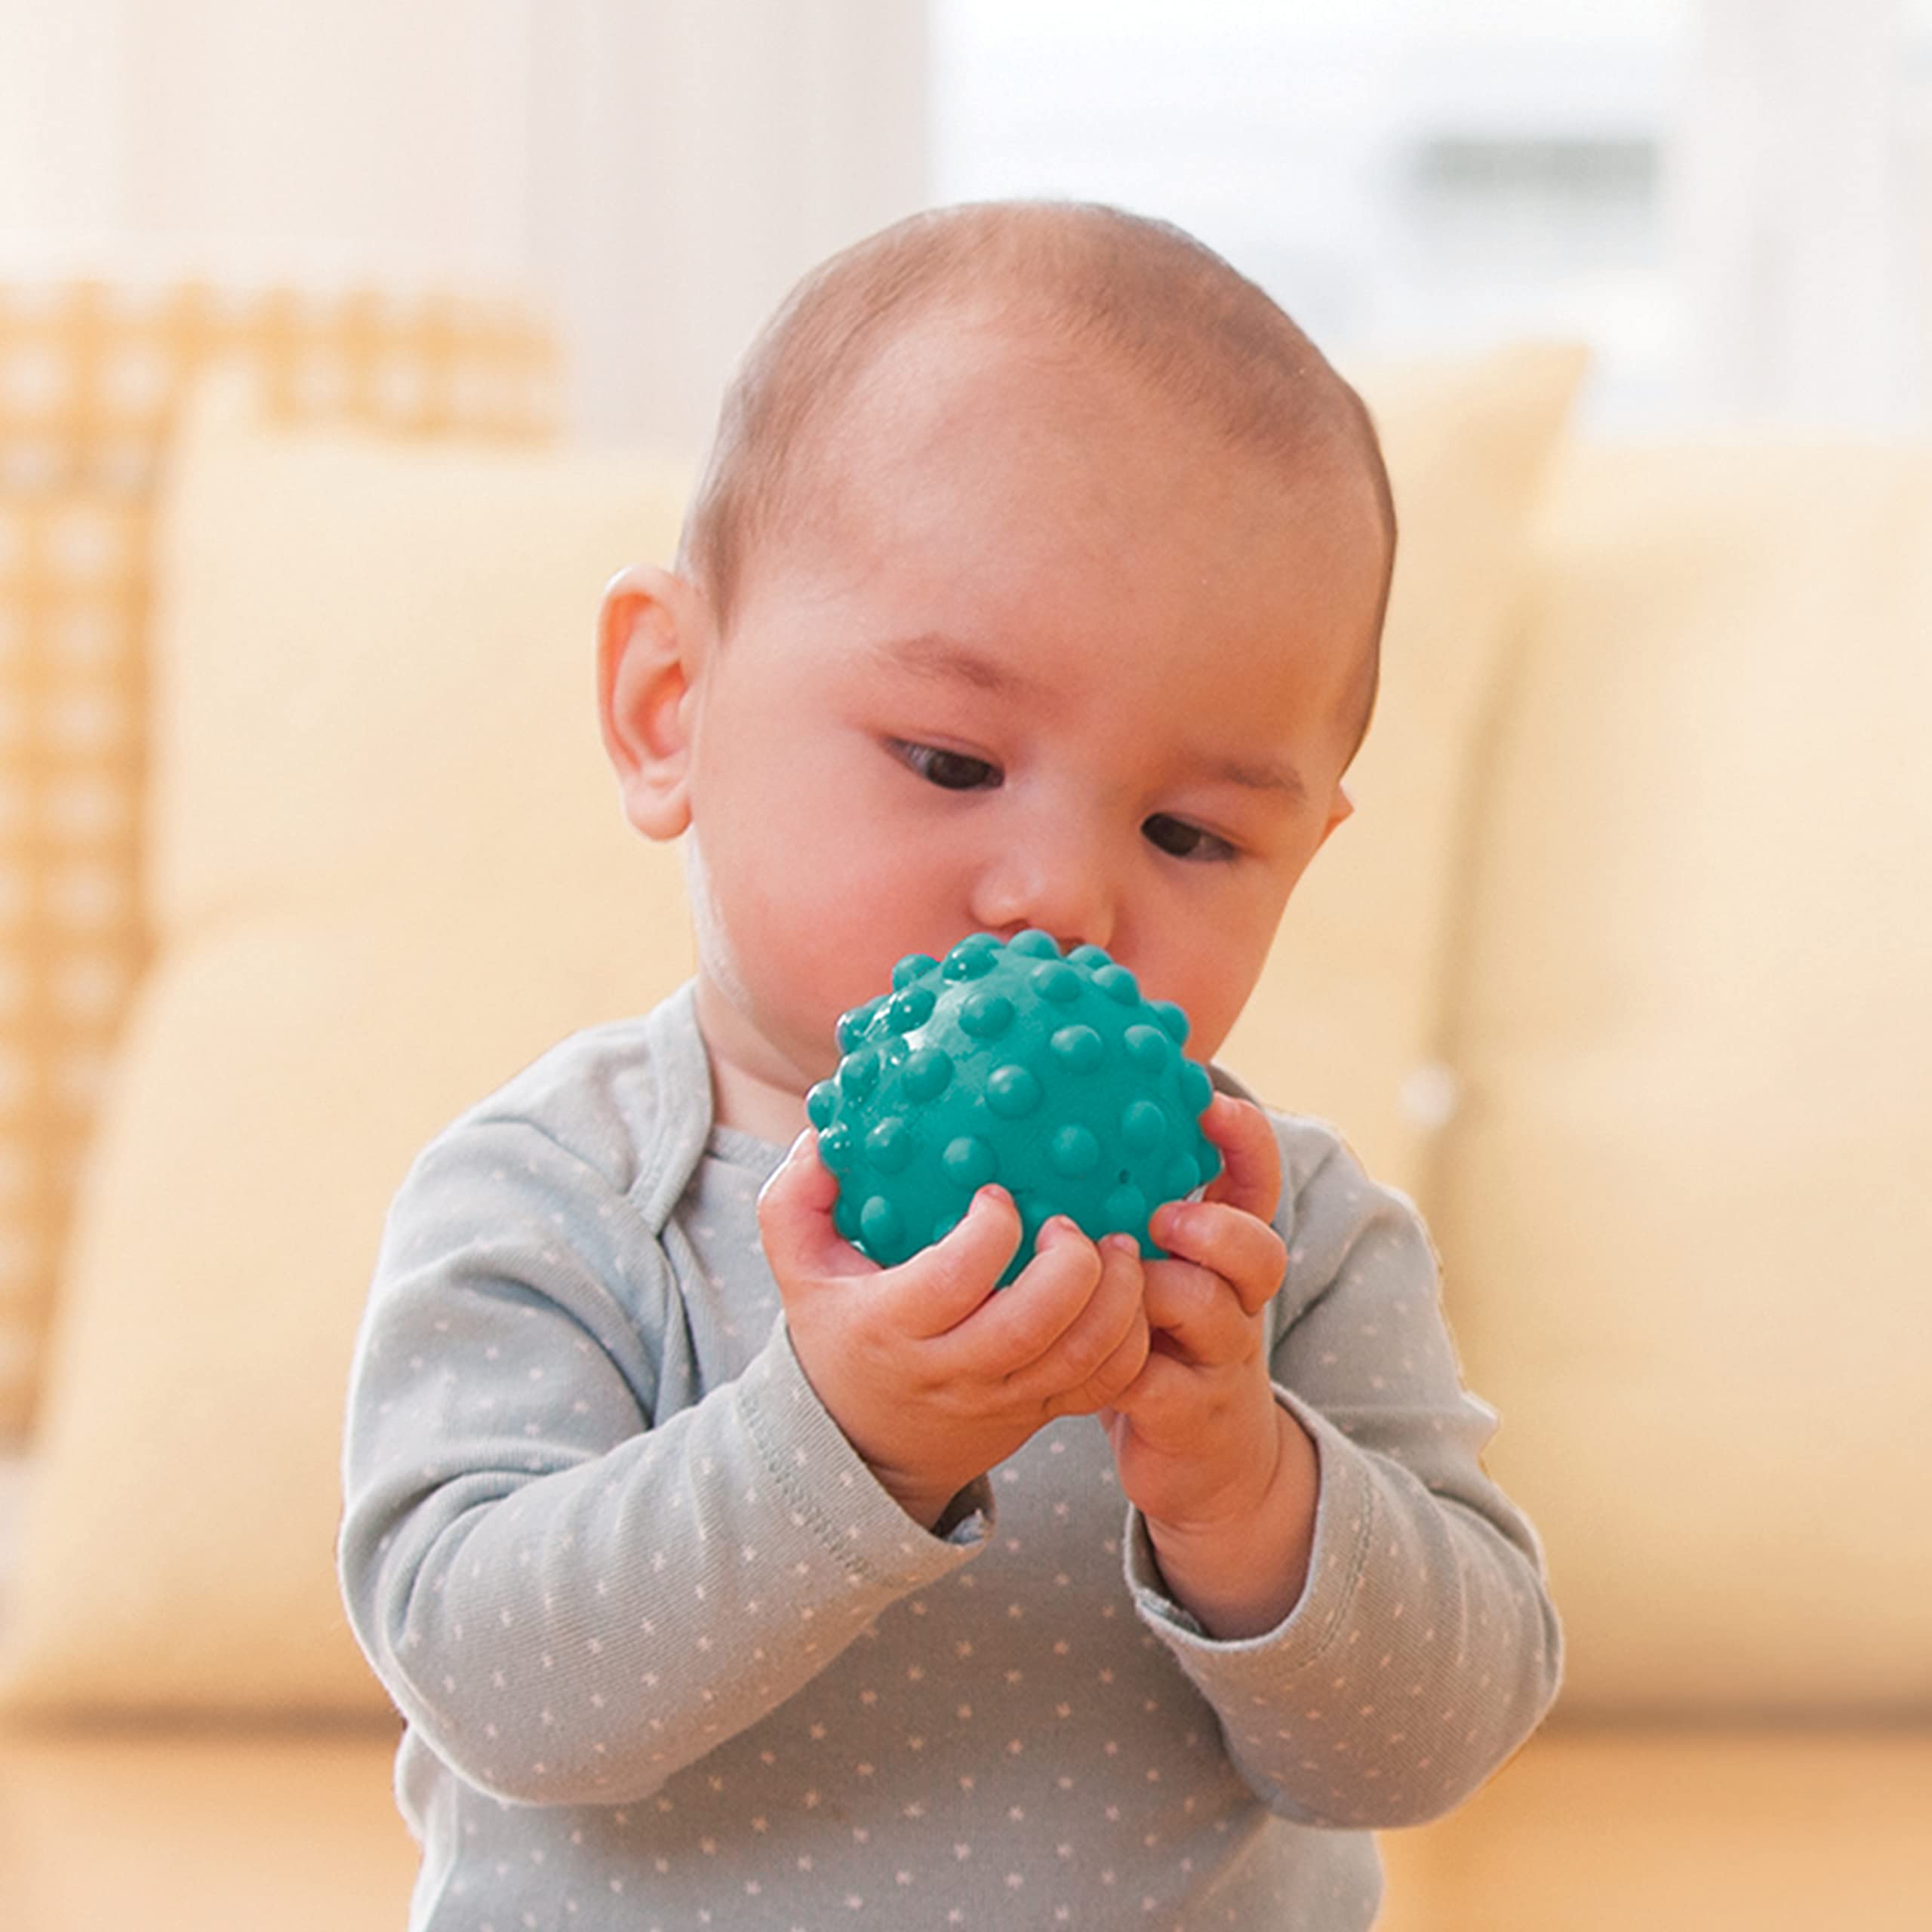 Infantino Textured Multi Ball Set - Toy for Sensory Exploration and Engagement for Ages 6 Months and up, 10 Piece Set